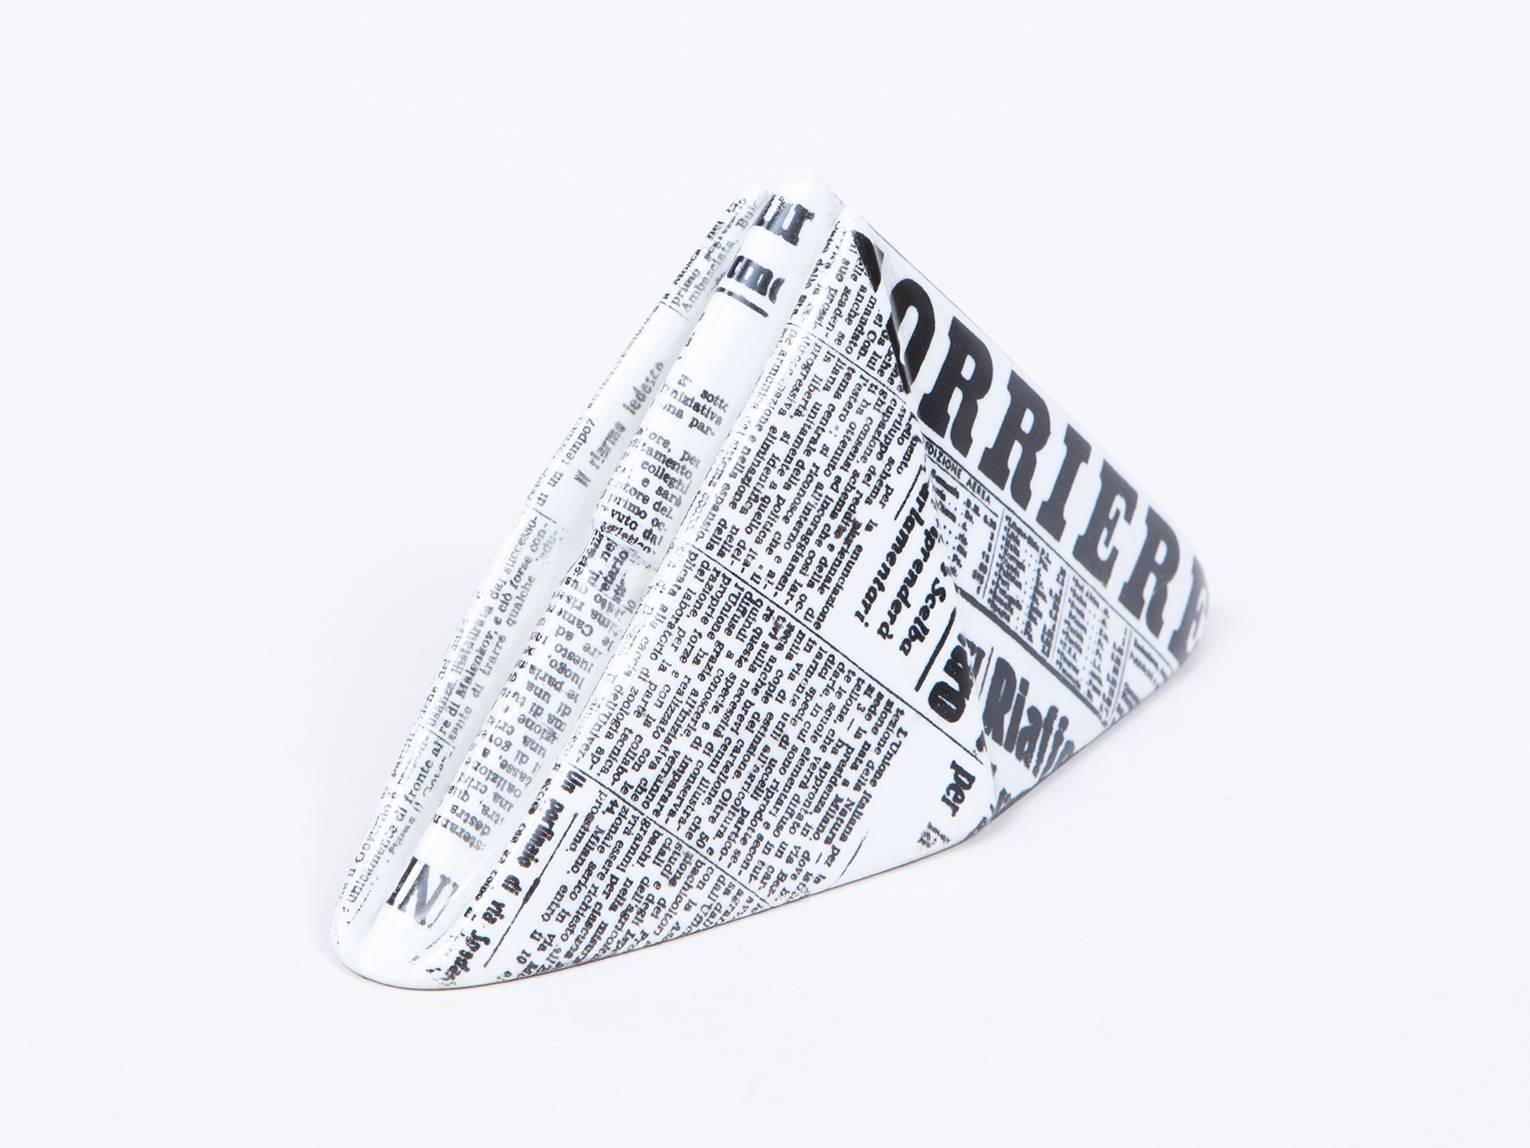 Porcelain paperweight in the form of a newspaper hat by iconic Italian artist Piero Fornasetti.